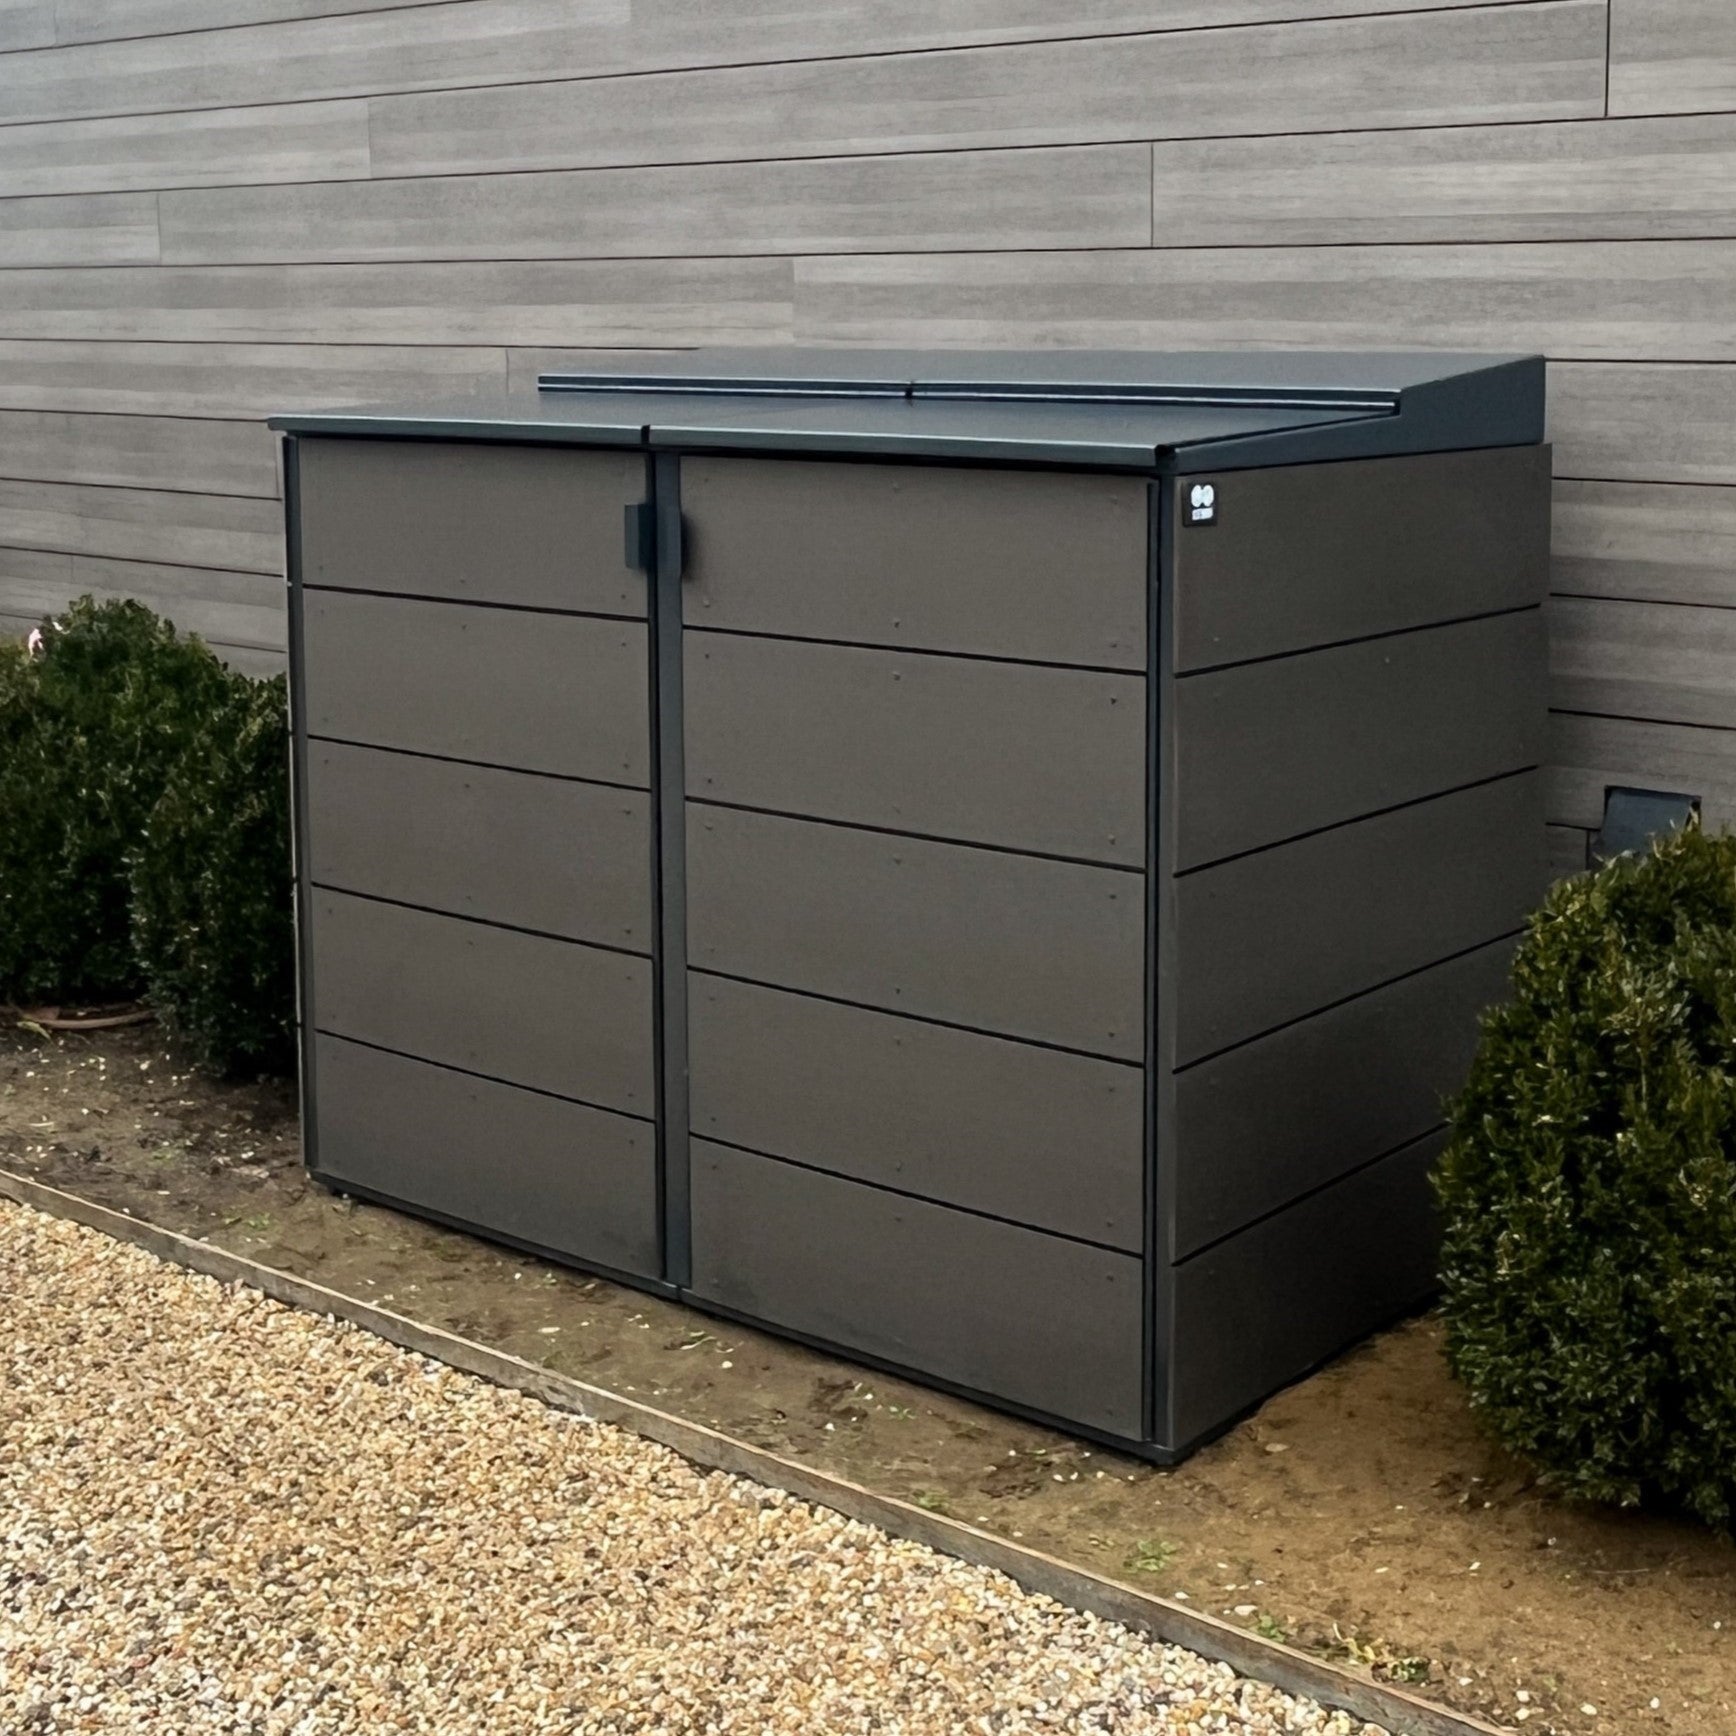 XL trash and recycling enclosure for 65-96 gallon cans